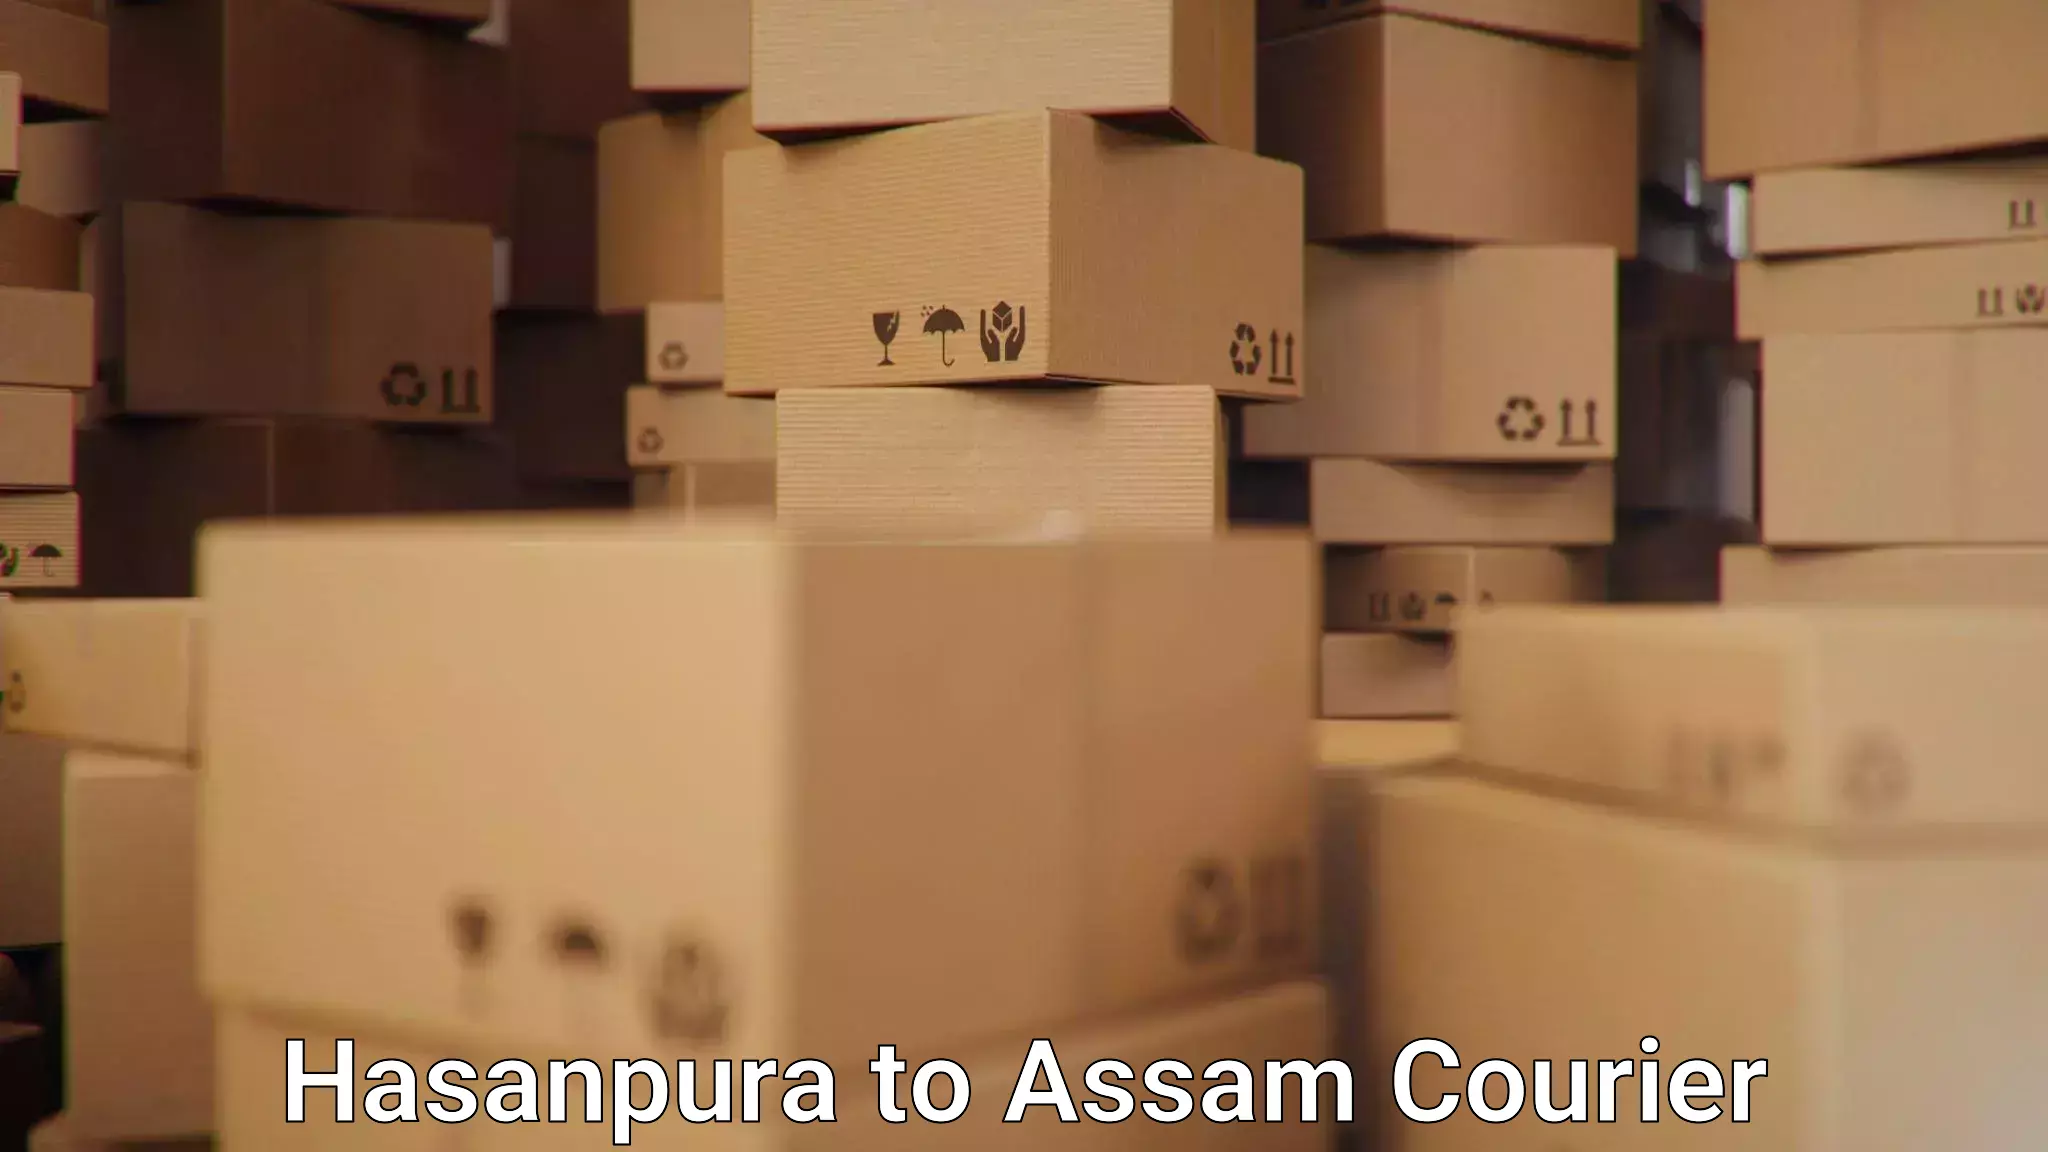 24-hour courier services Hasanpura to Assam